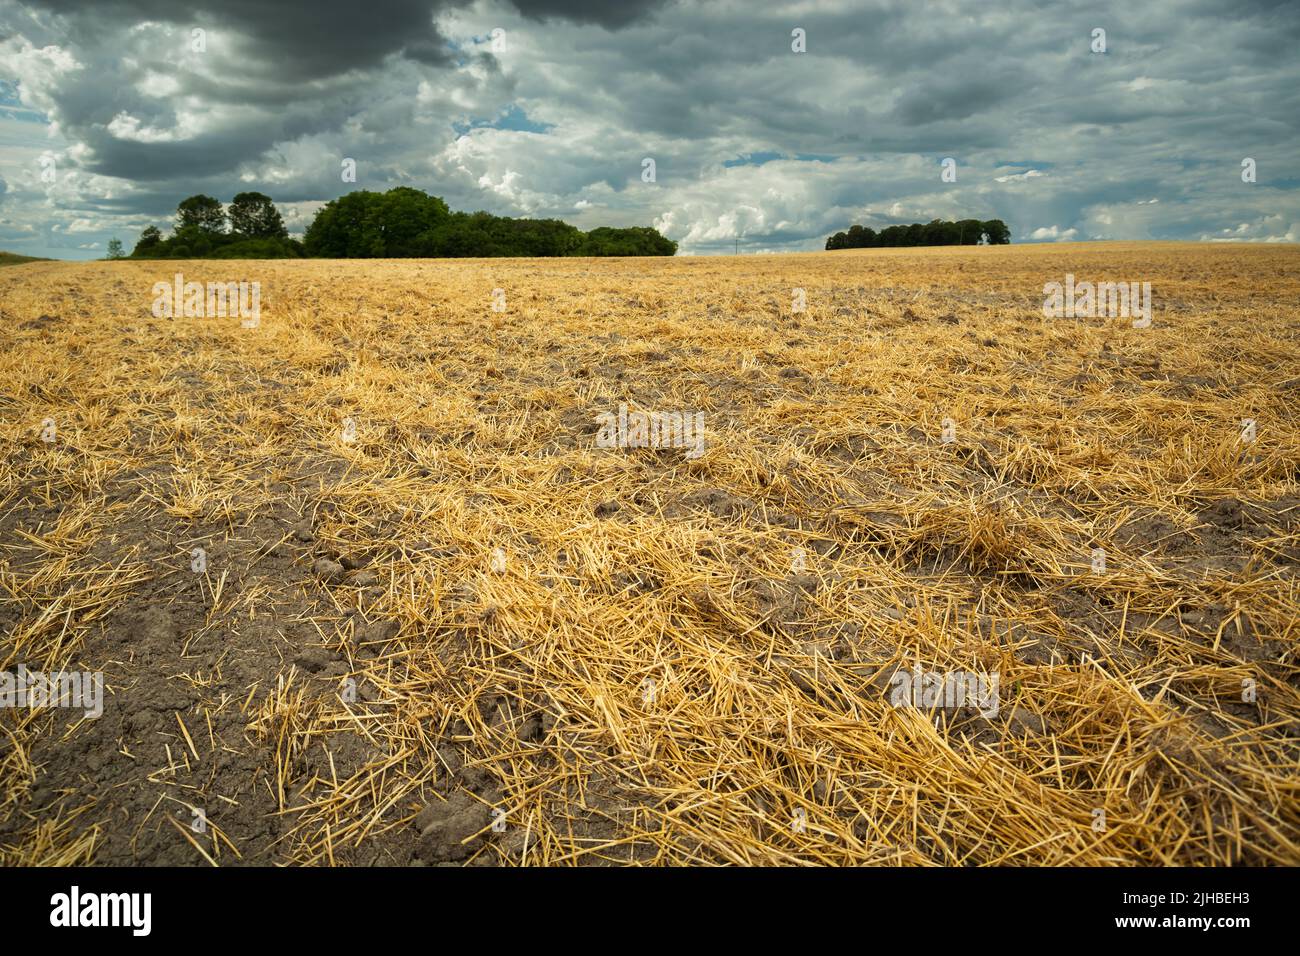 Straw in the field after haymaking and rain clouds, summer rural view Stock Photo